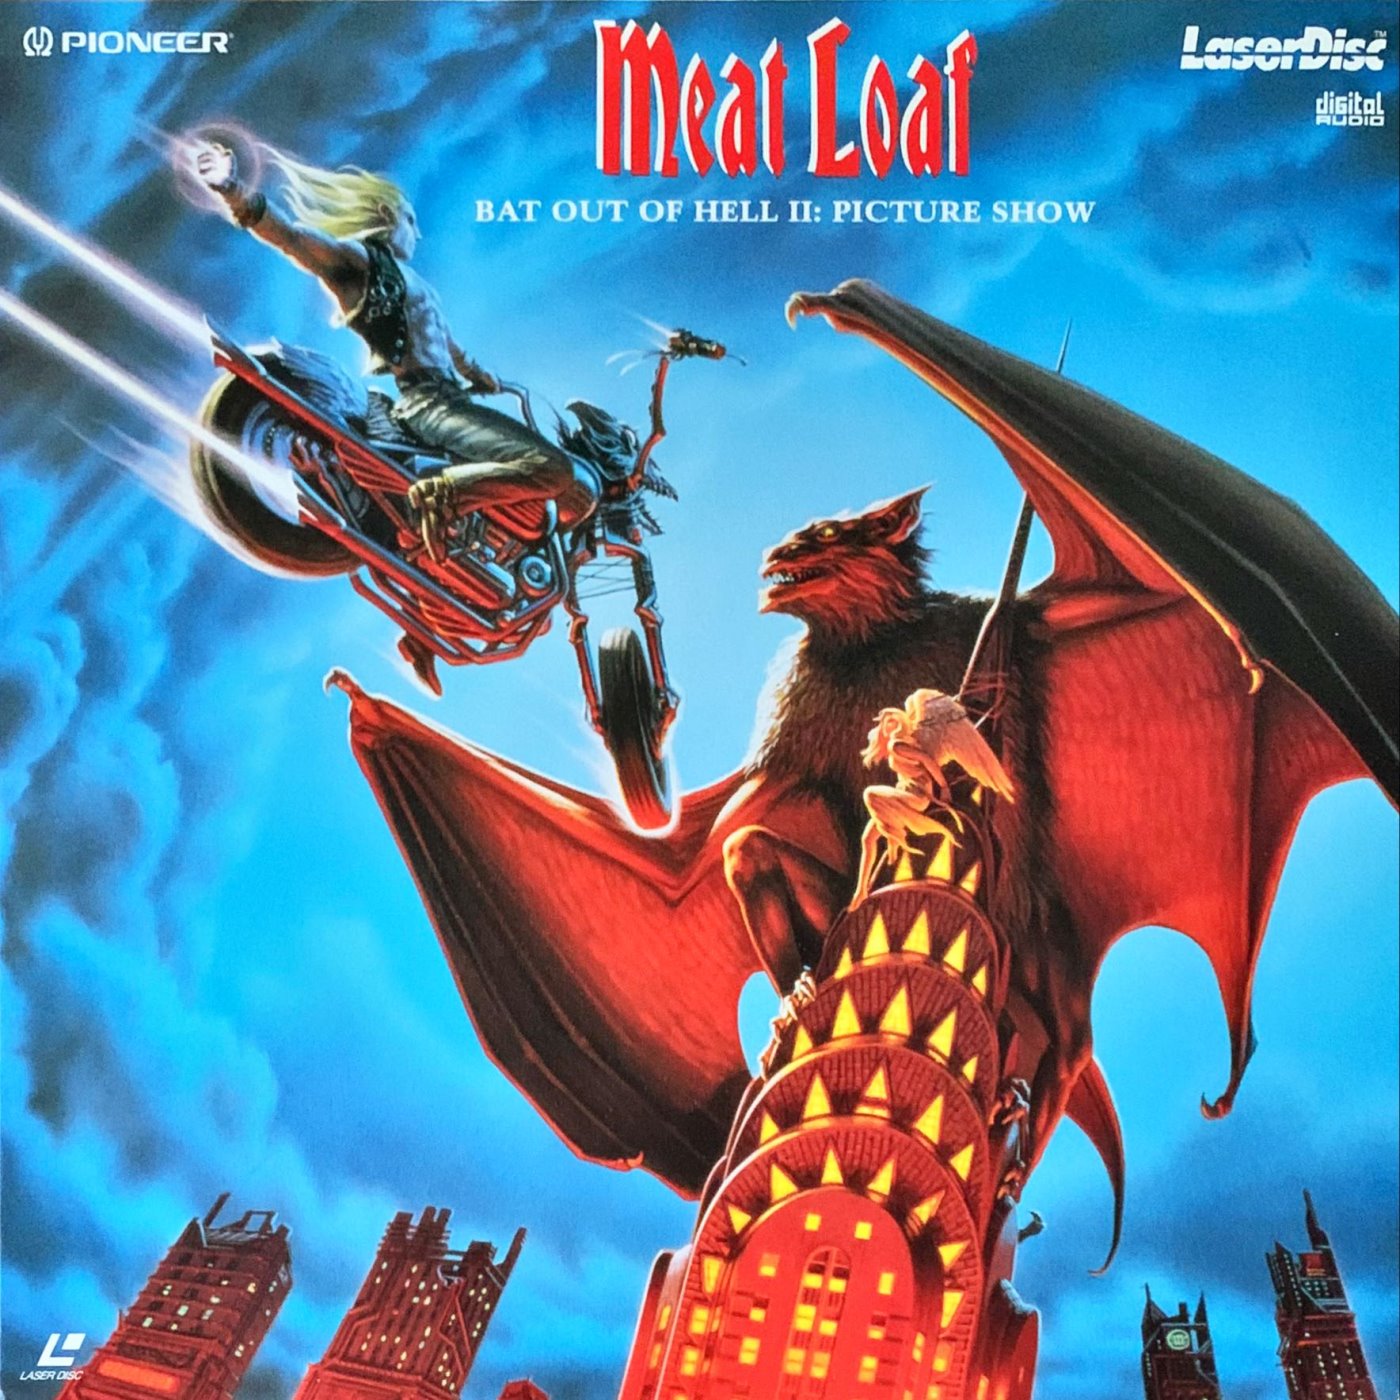 Cover - Meat Loaf - Bat Out of Hell II: Picture Show.jpg